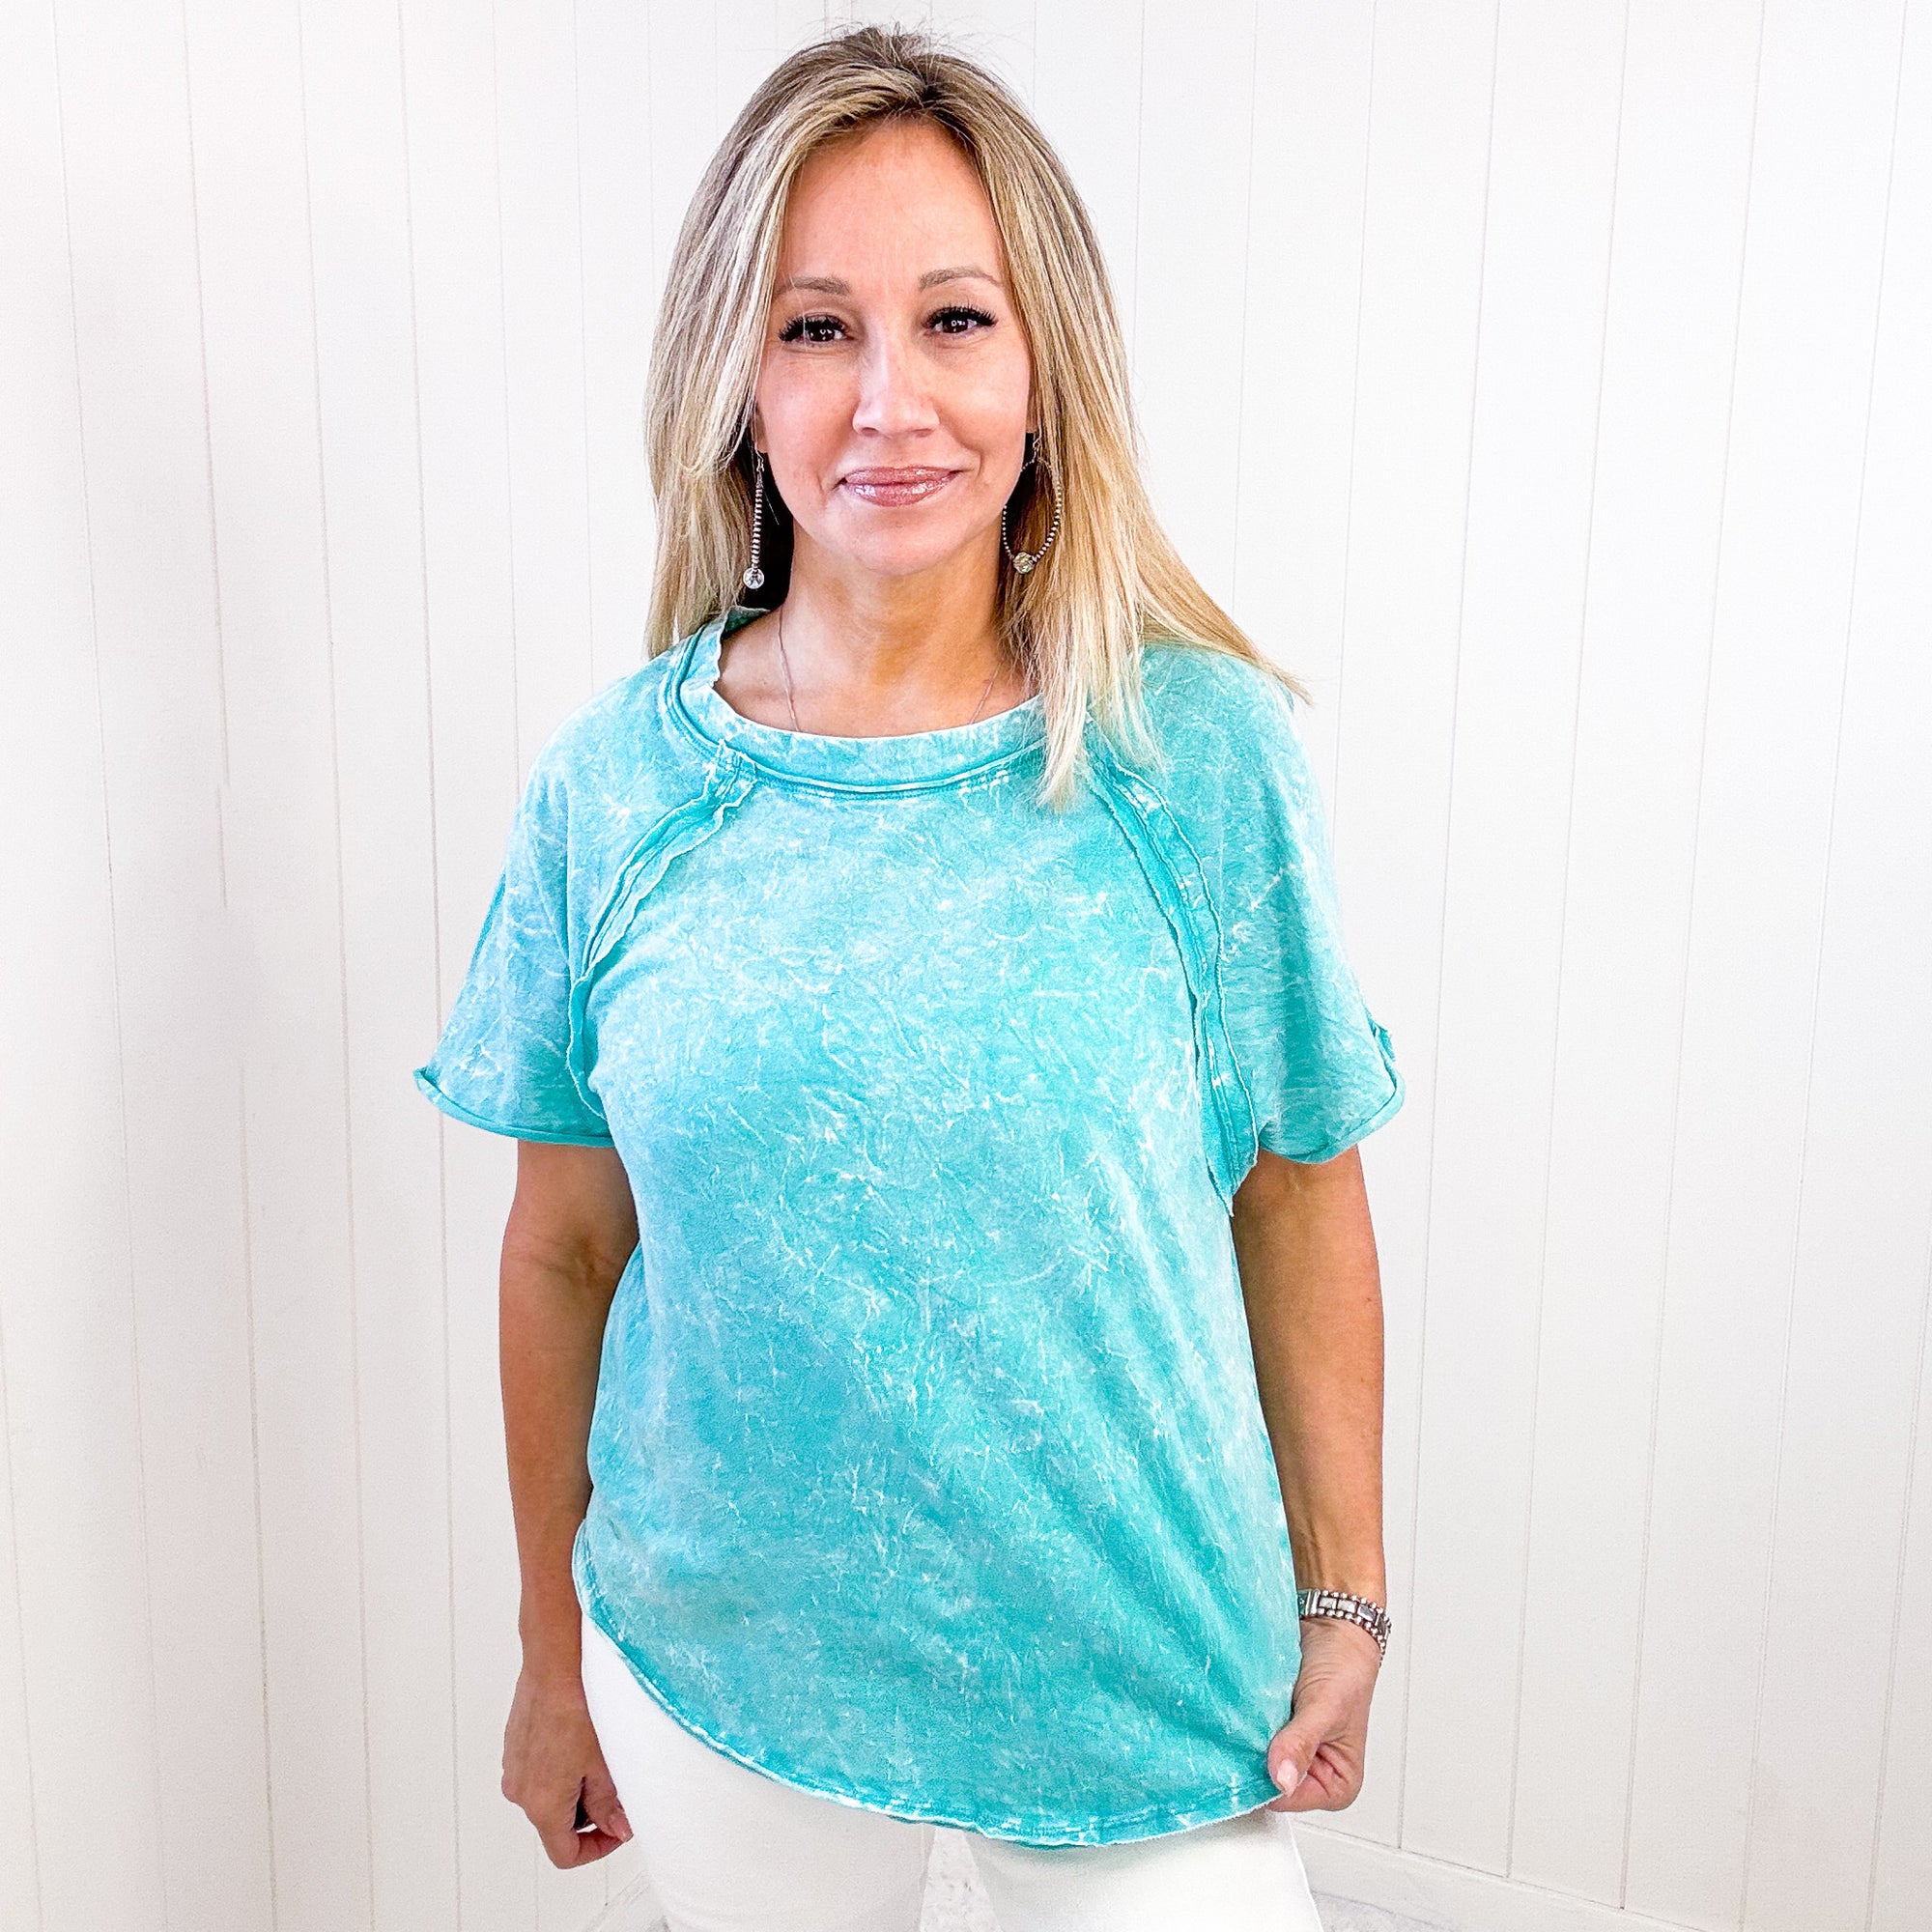 Soft Spring Crinkle Washed Raglan Short Sleeve Top in 3 Colors - Boujee Boutique 